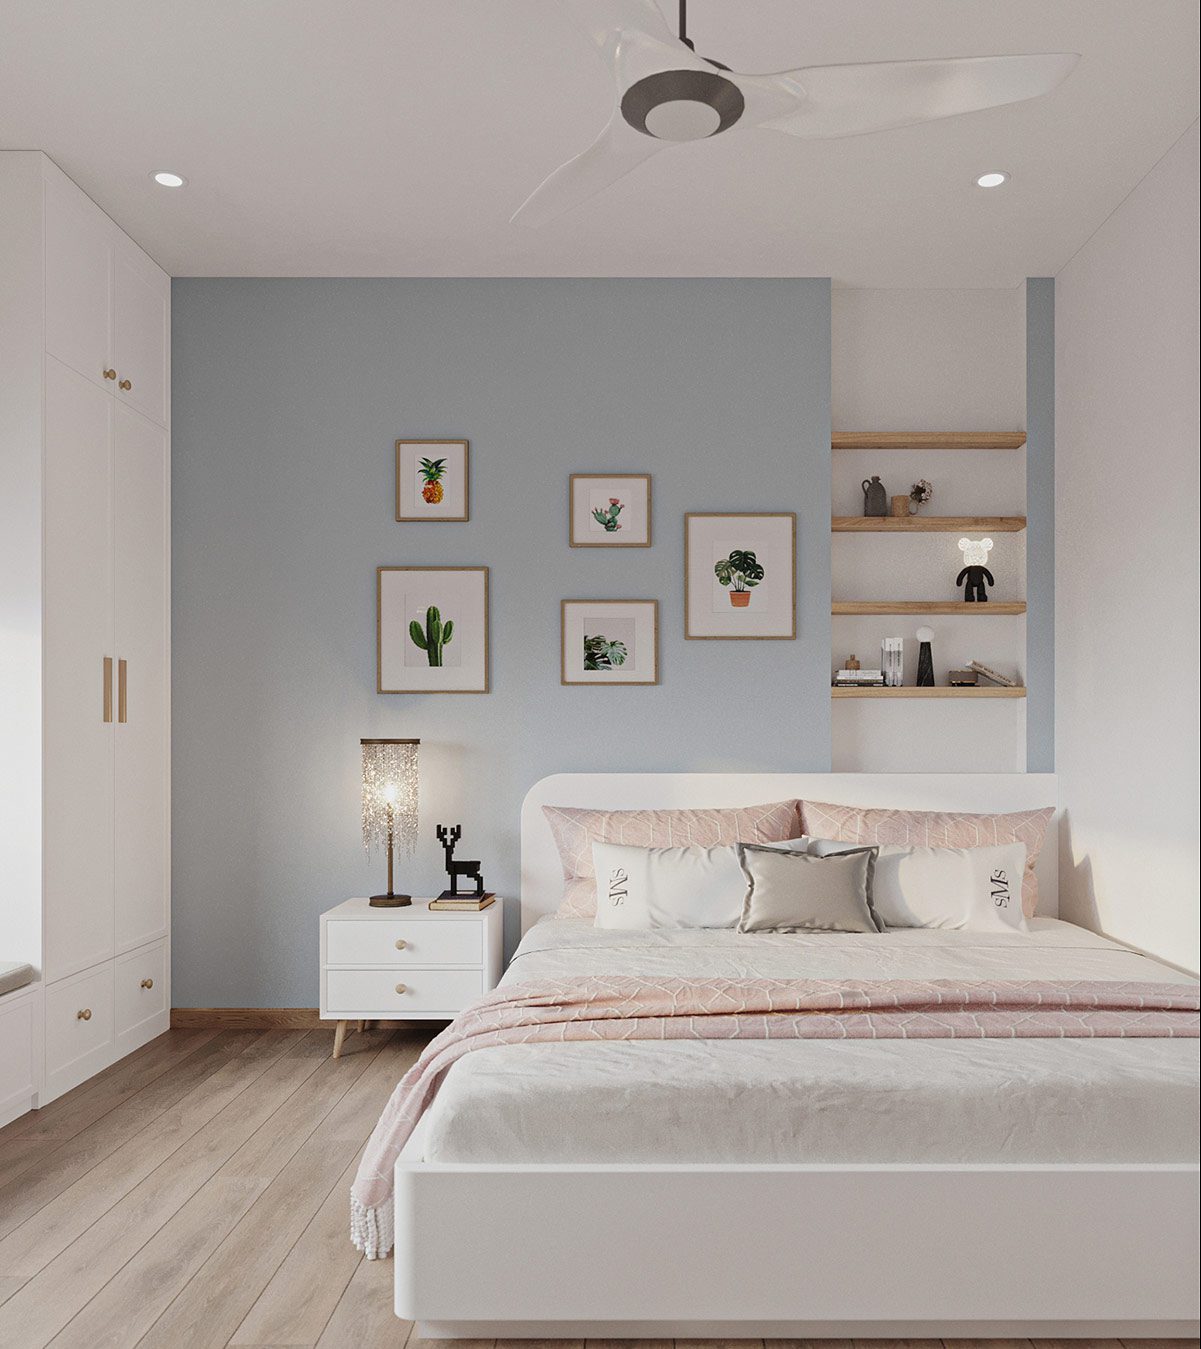 Pink as a Soft Accent in a Light Blue Bedroom